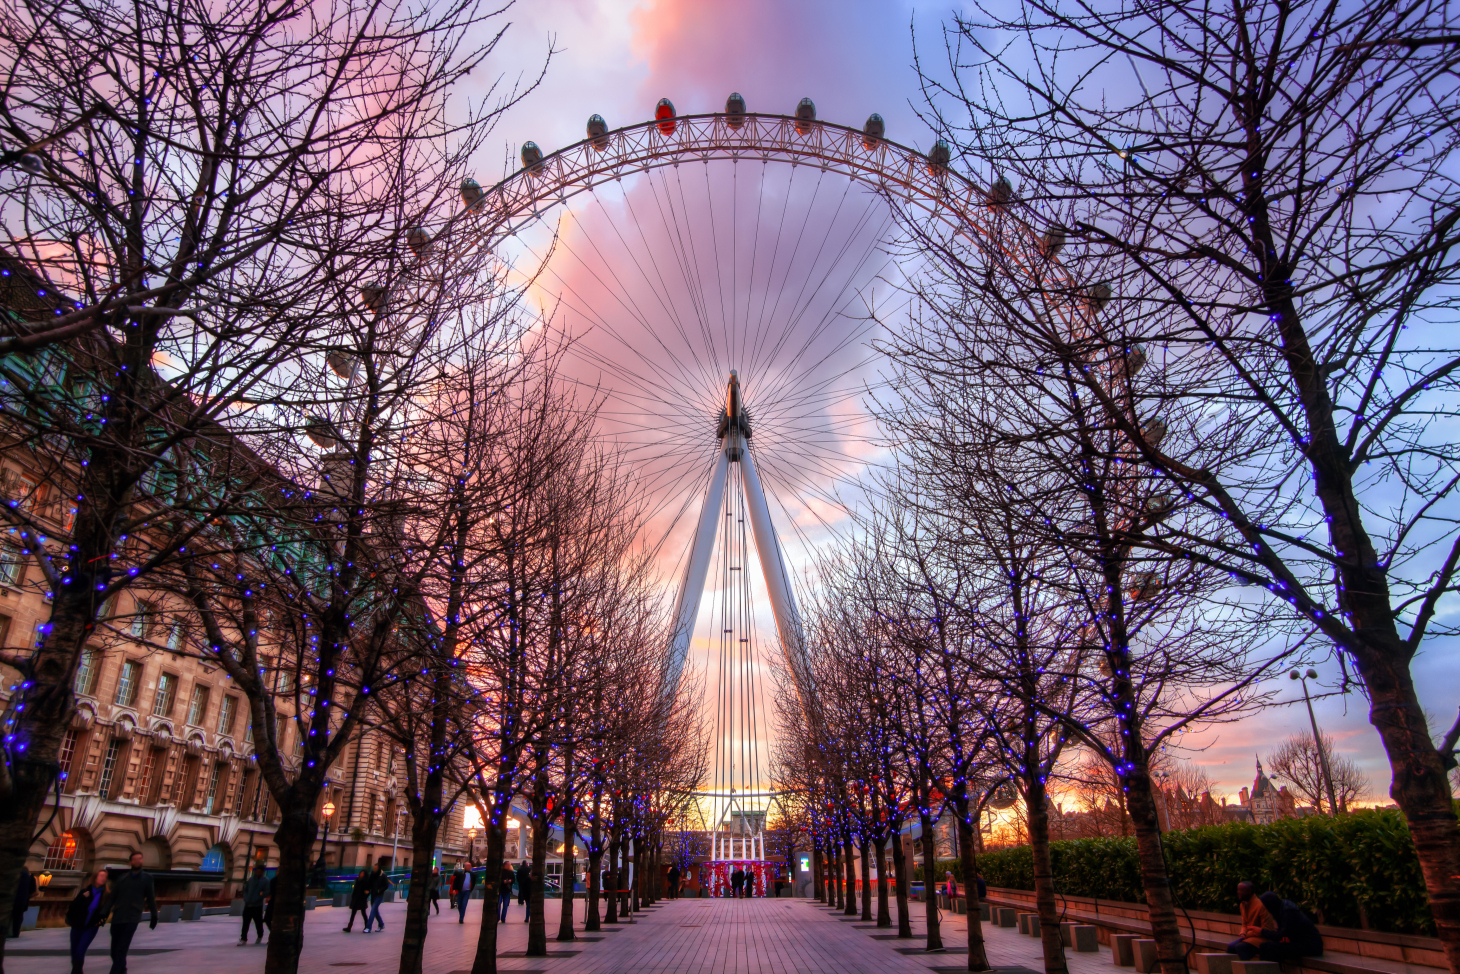 London Eye | London, England Attractions - Lonely Planet